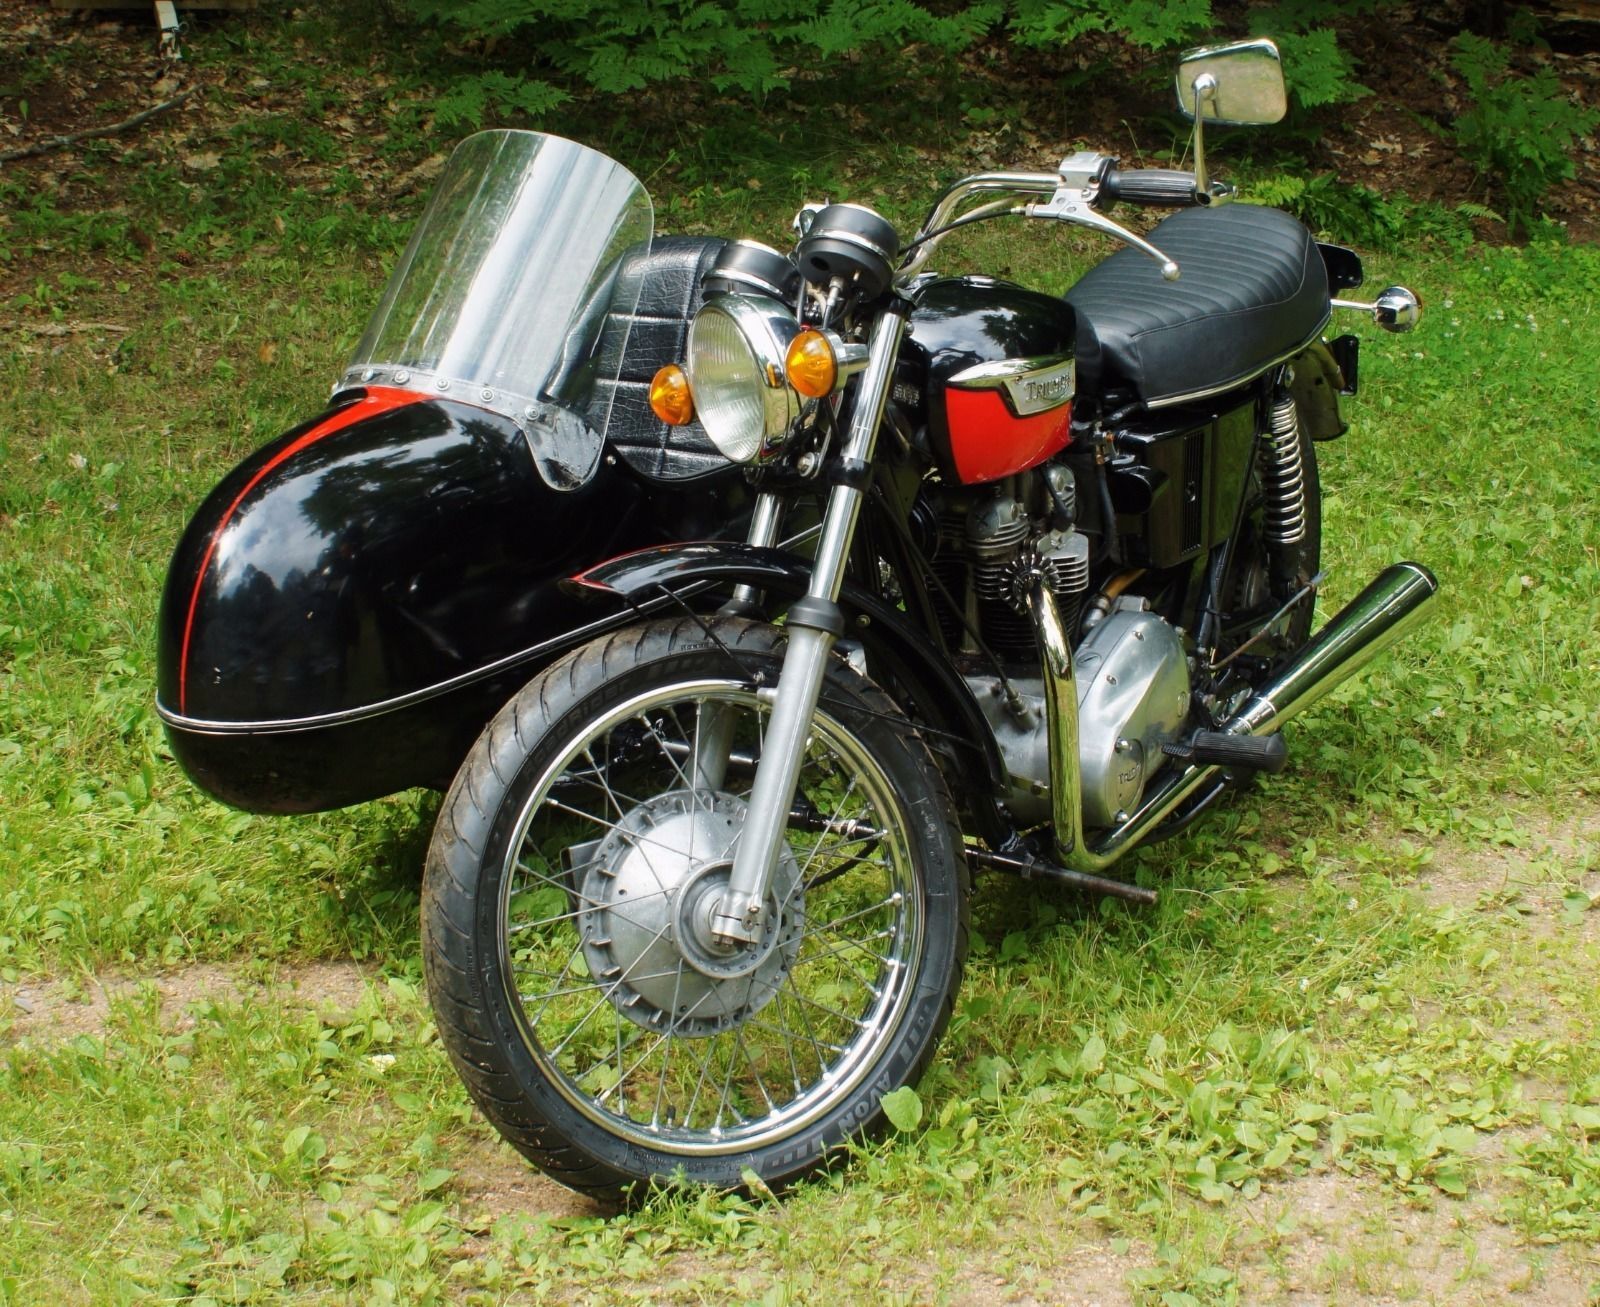 1971 Triumph Trophy 650 Motorcycle with Sidecar for sale